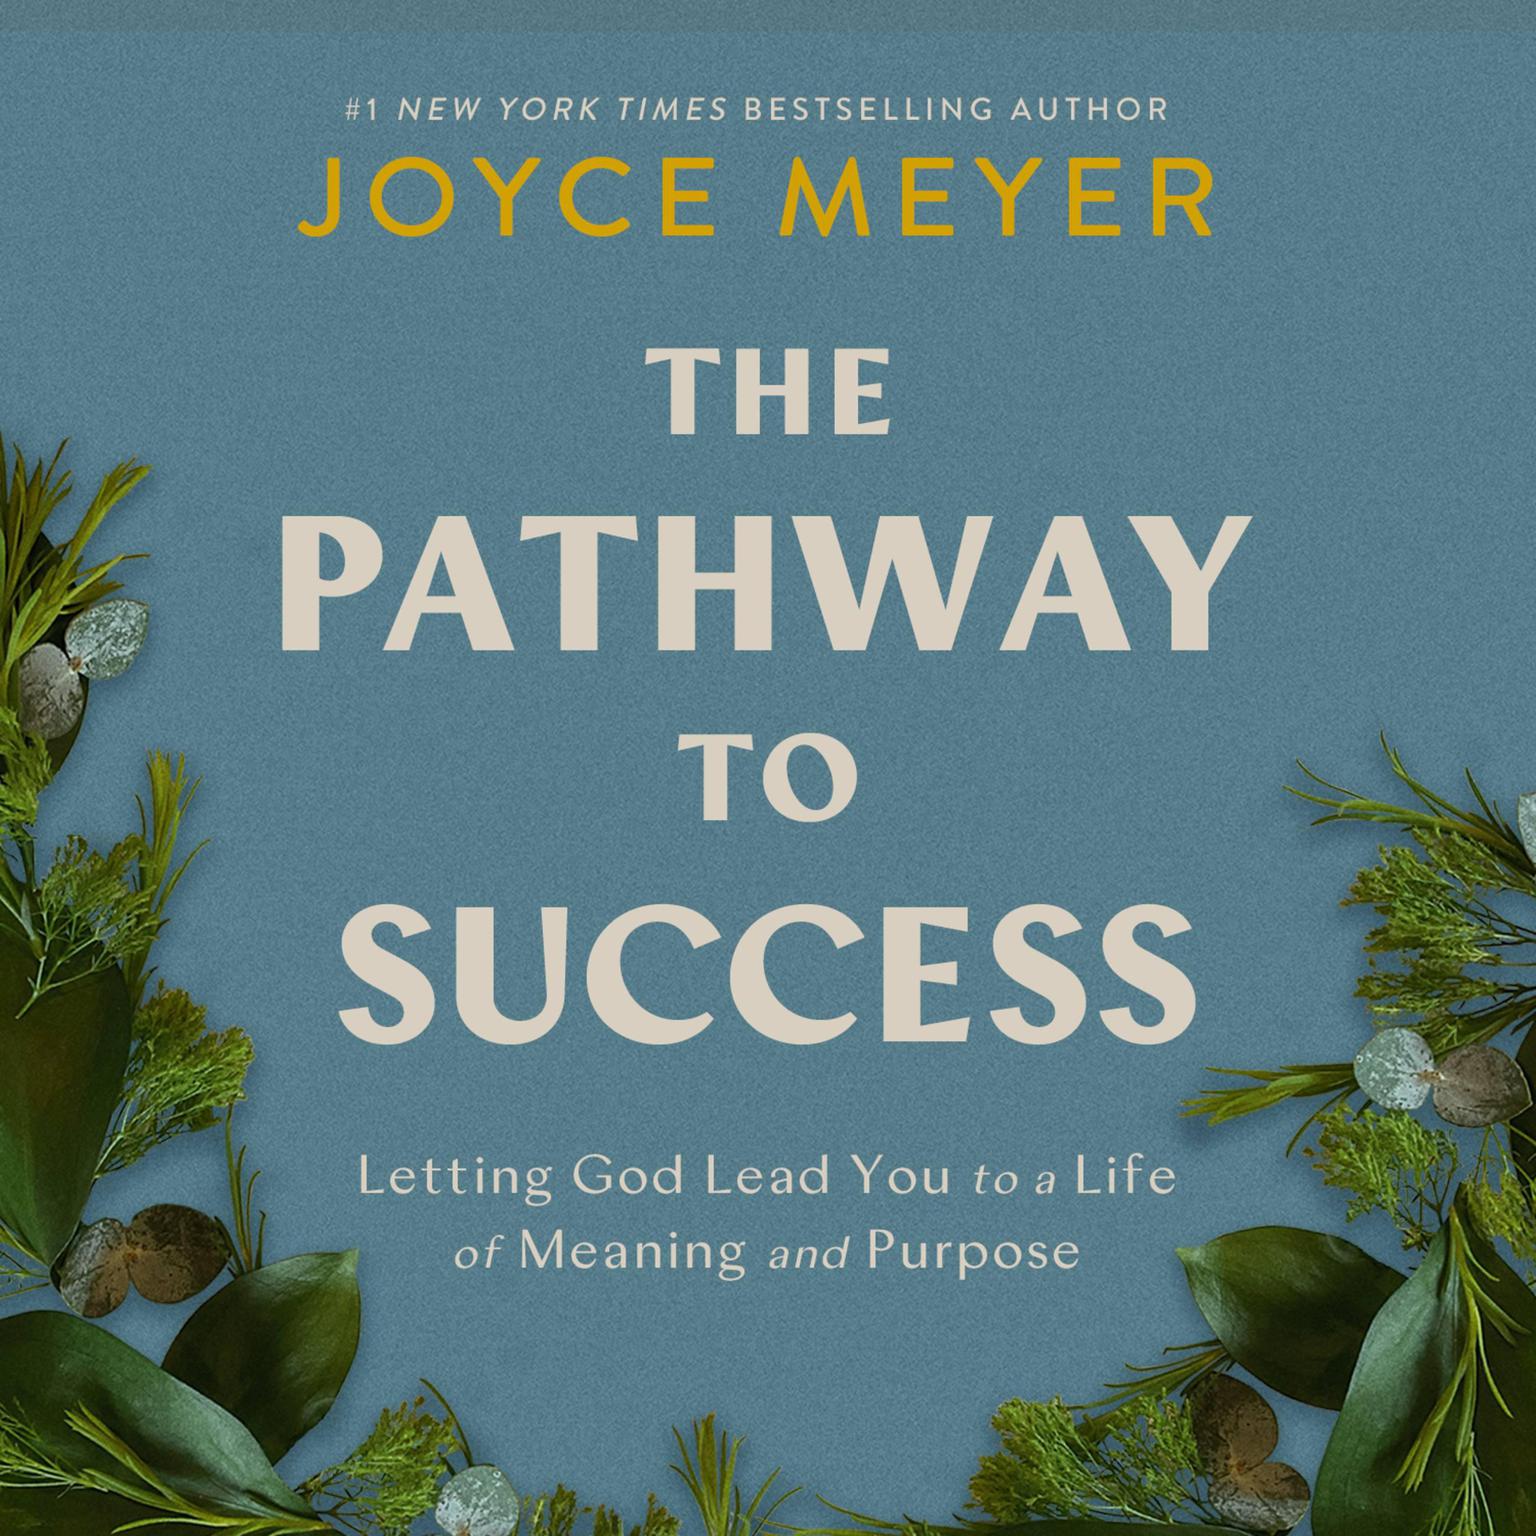 The Pathway to Success: Letting God Lead You to a Life of Meaning and Purpose Audiobook, by Joyce Meyer